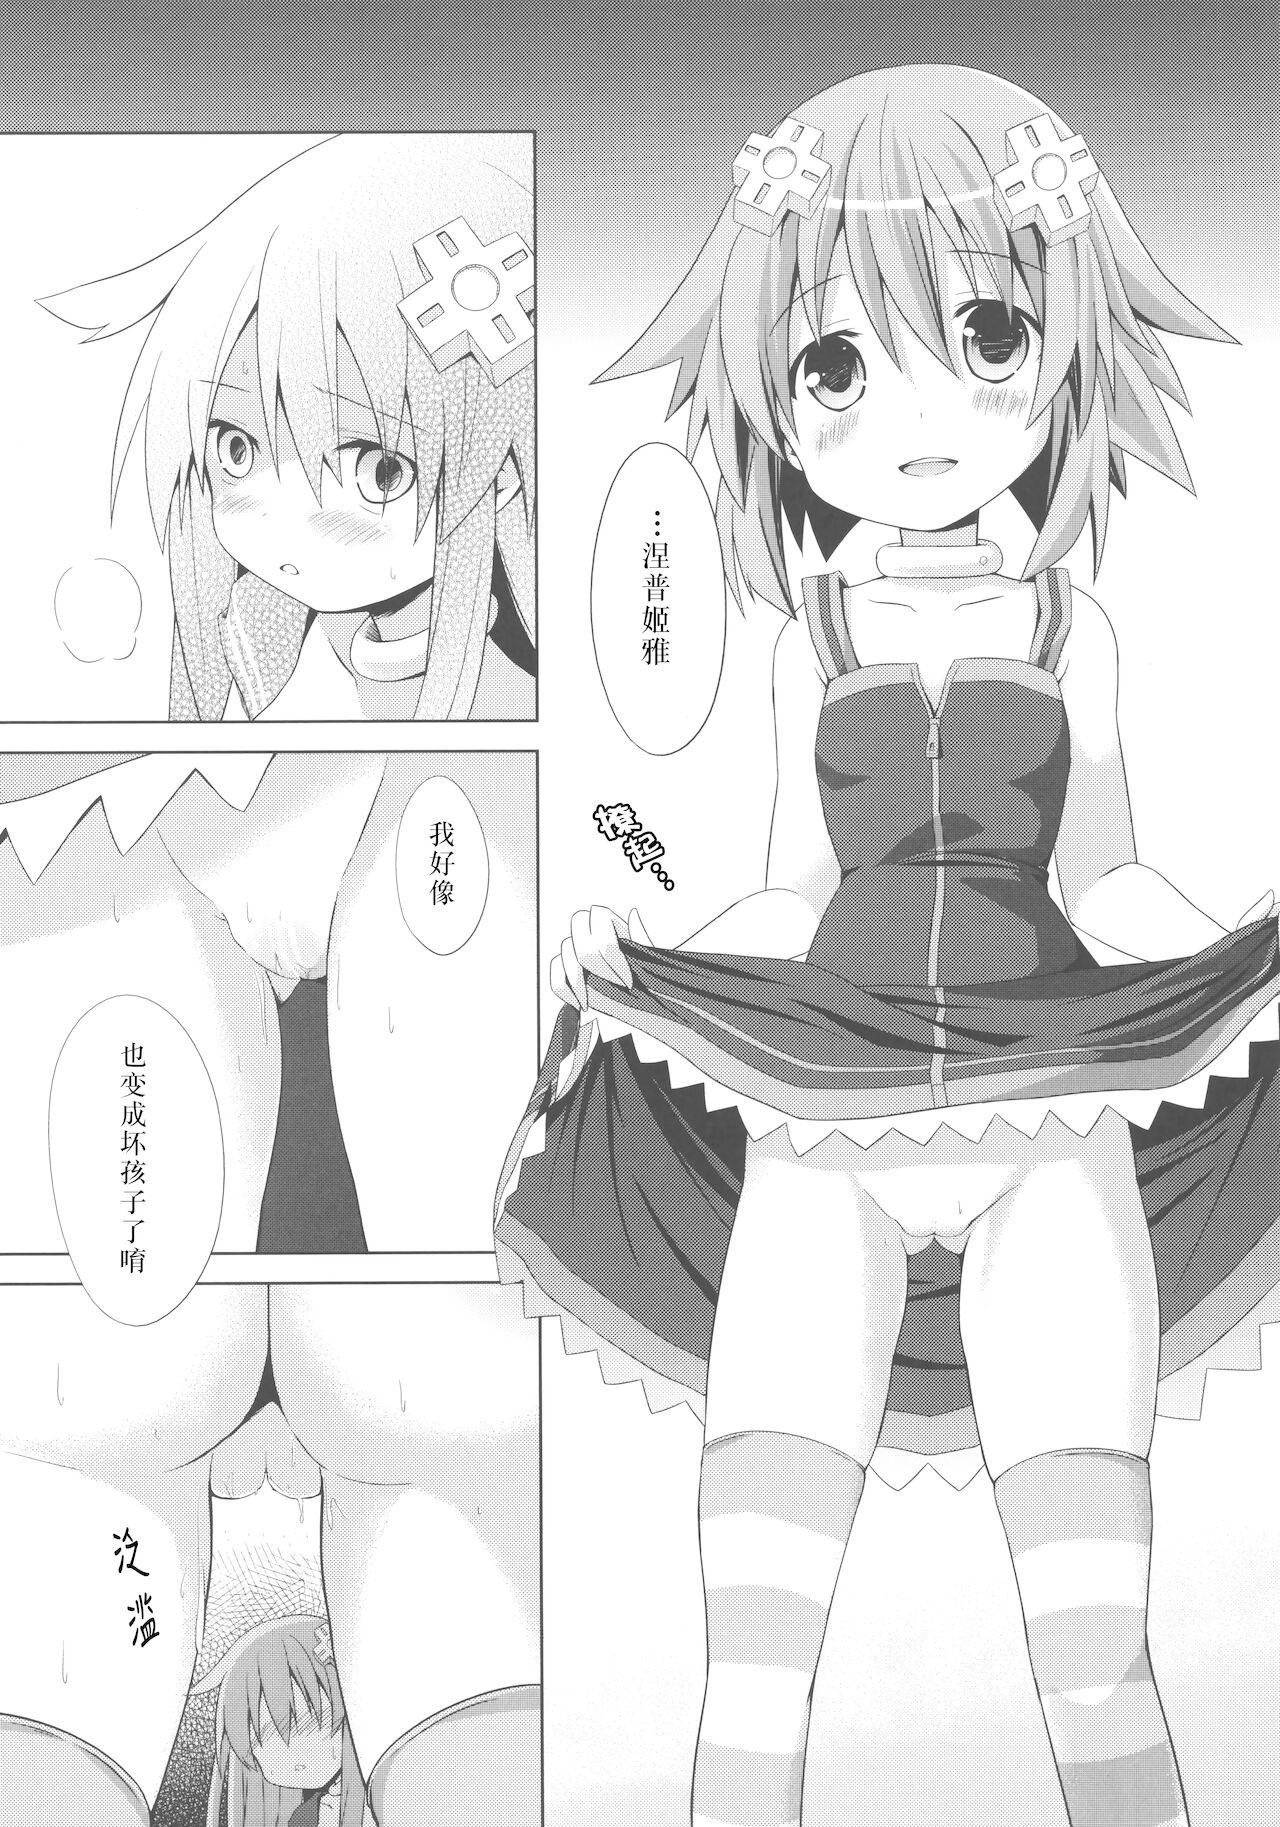 A certain Nepgear was harmed in the making of this doujinshi 9